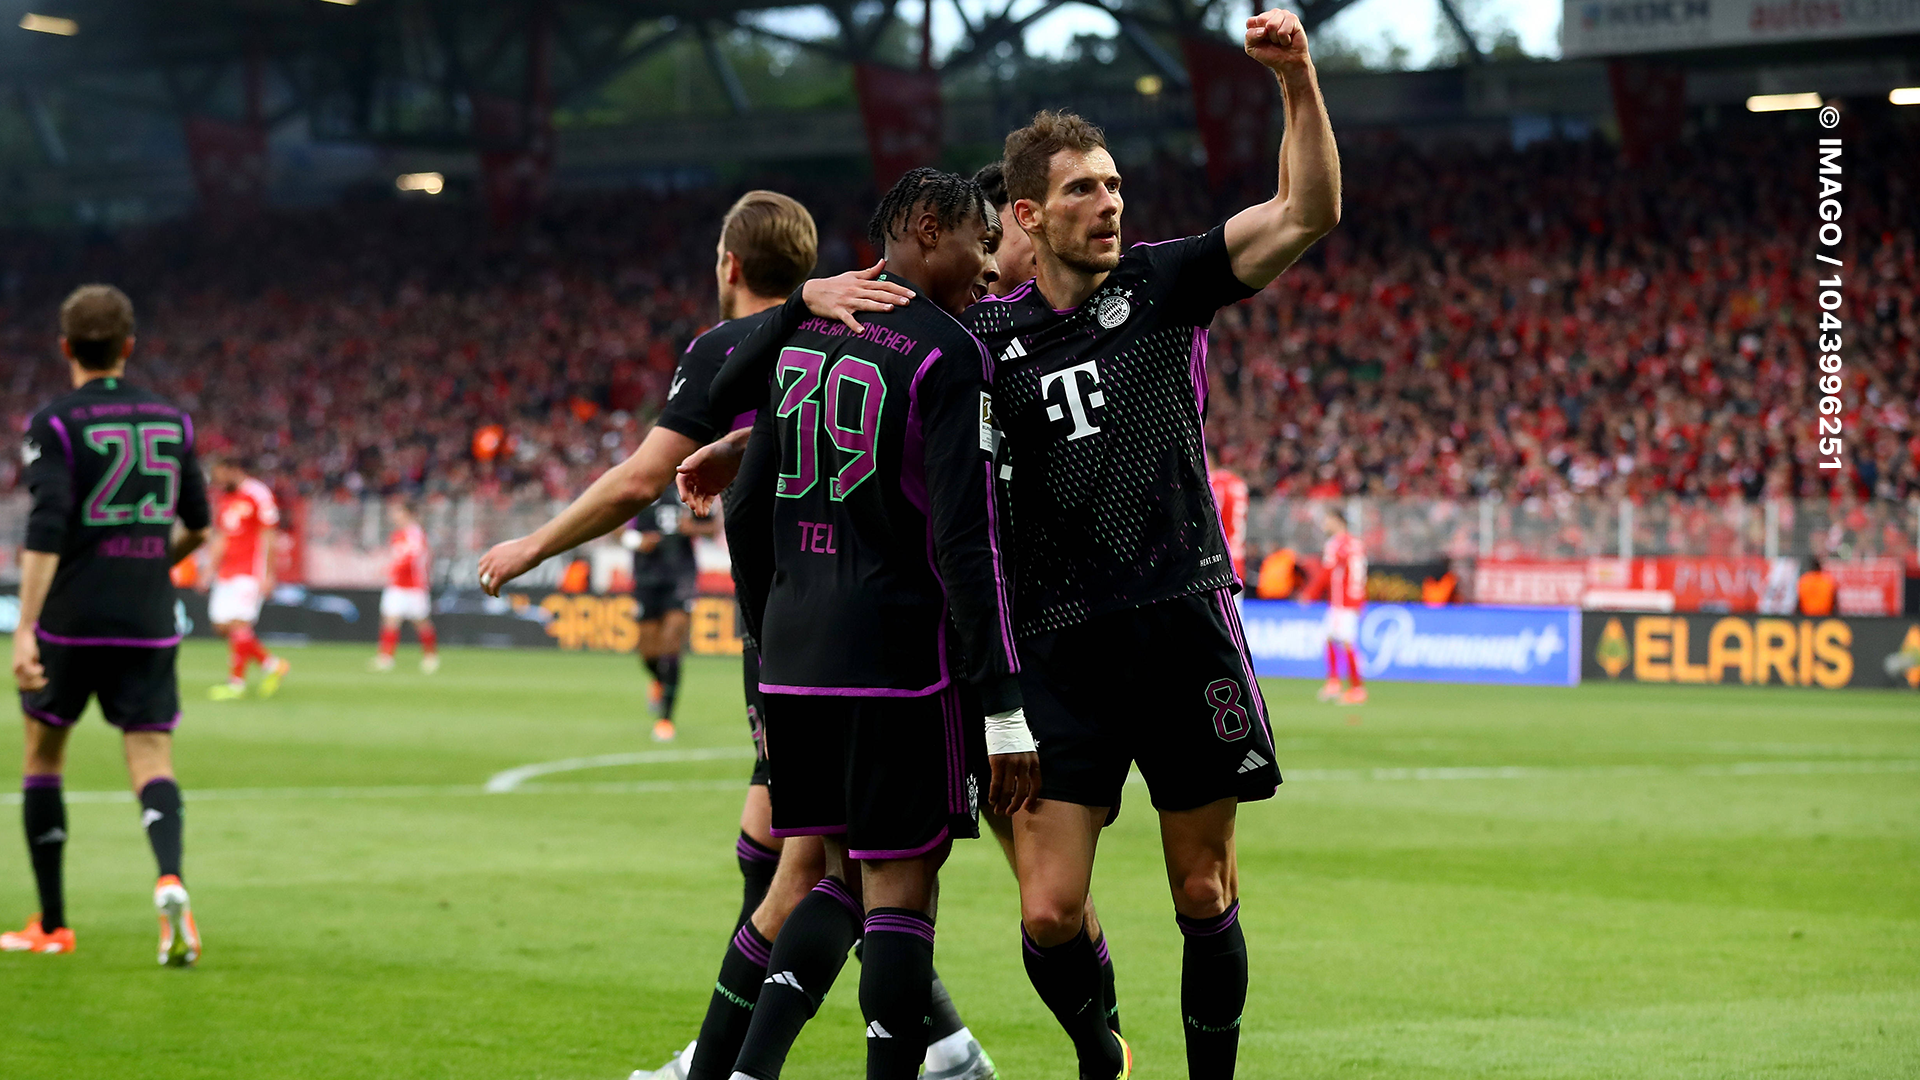 Goretzka fights for his future at Bayern - decision in the stars?